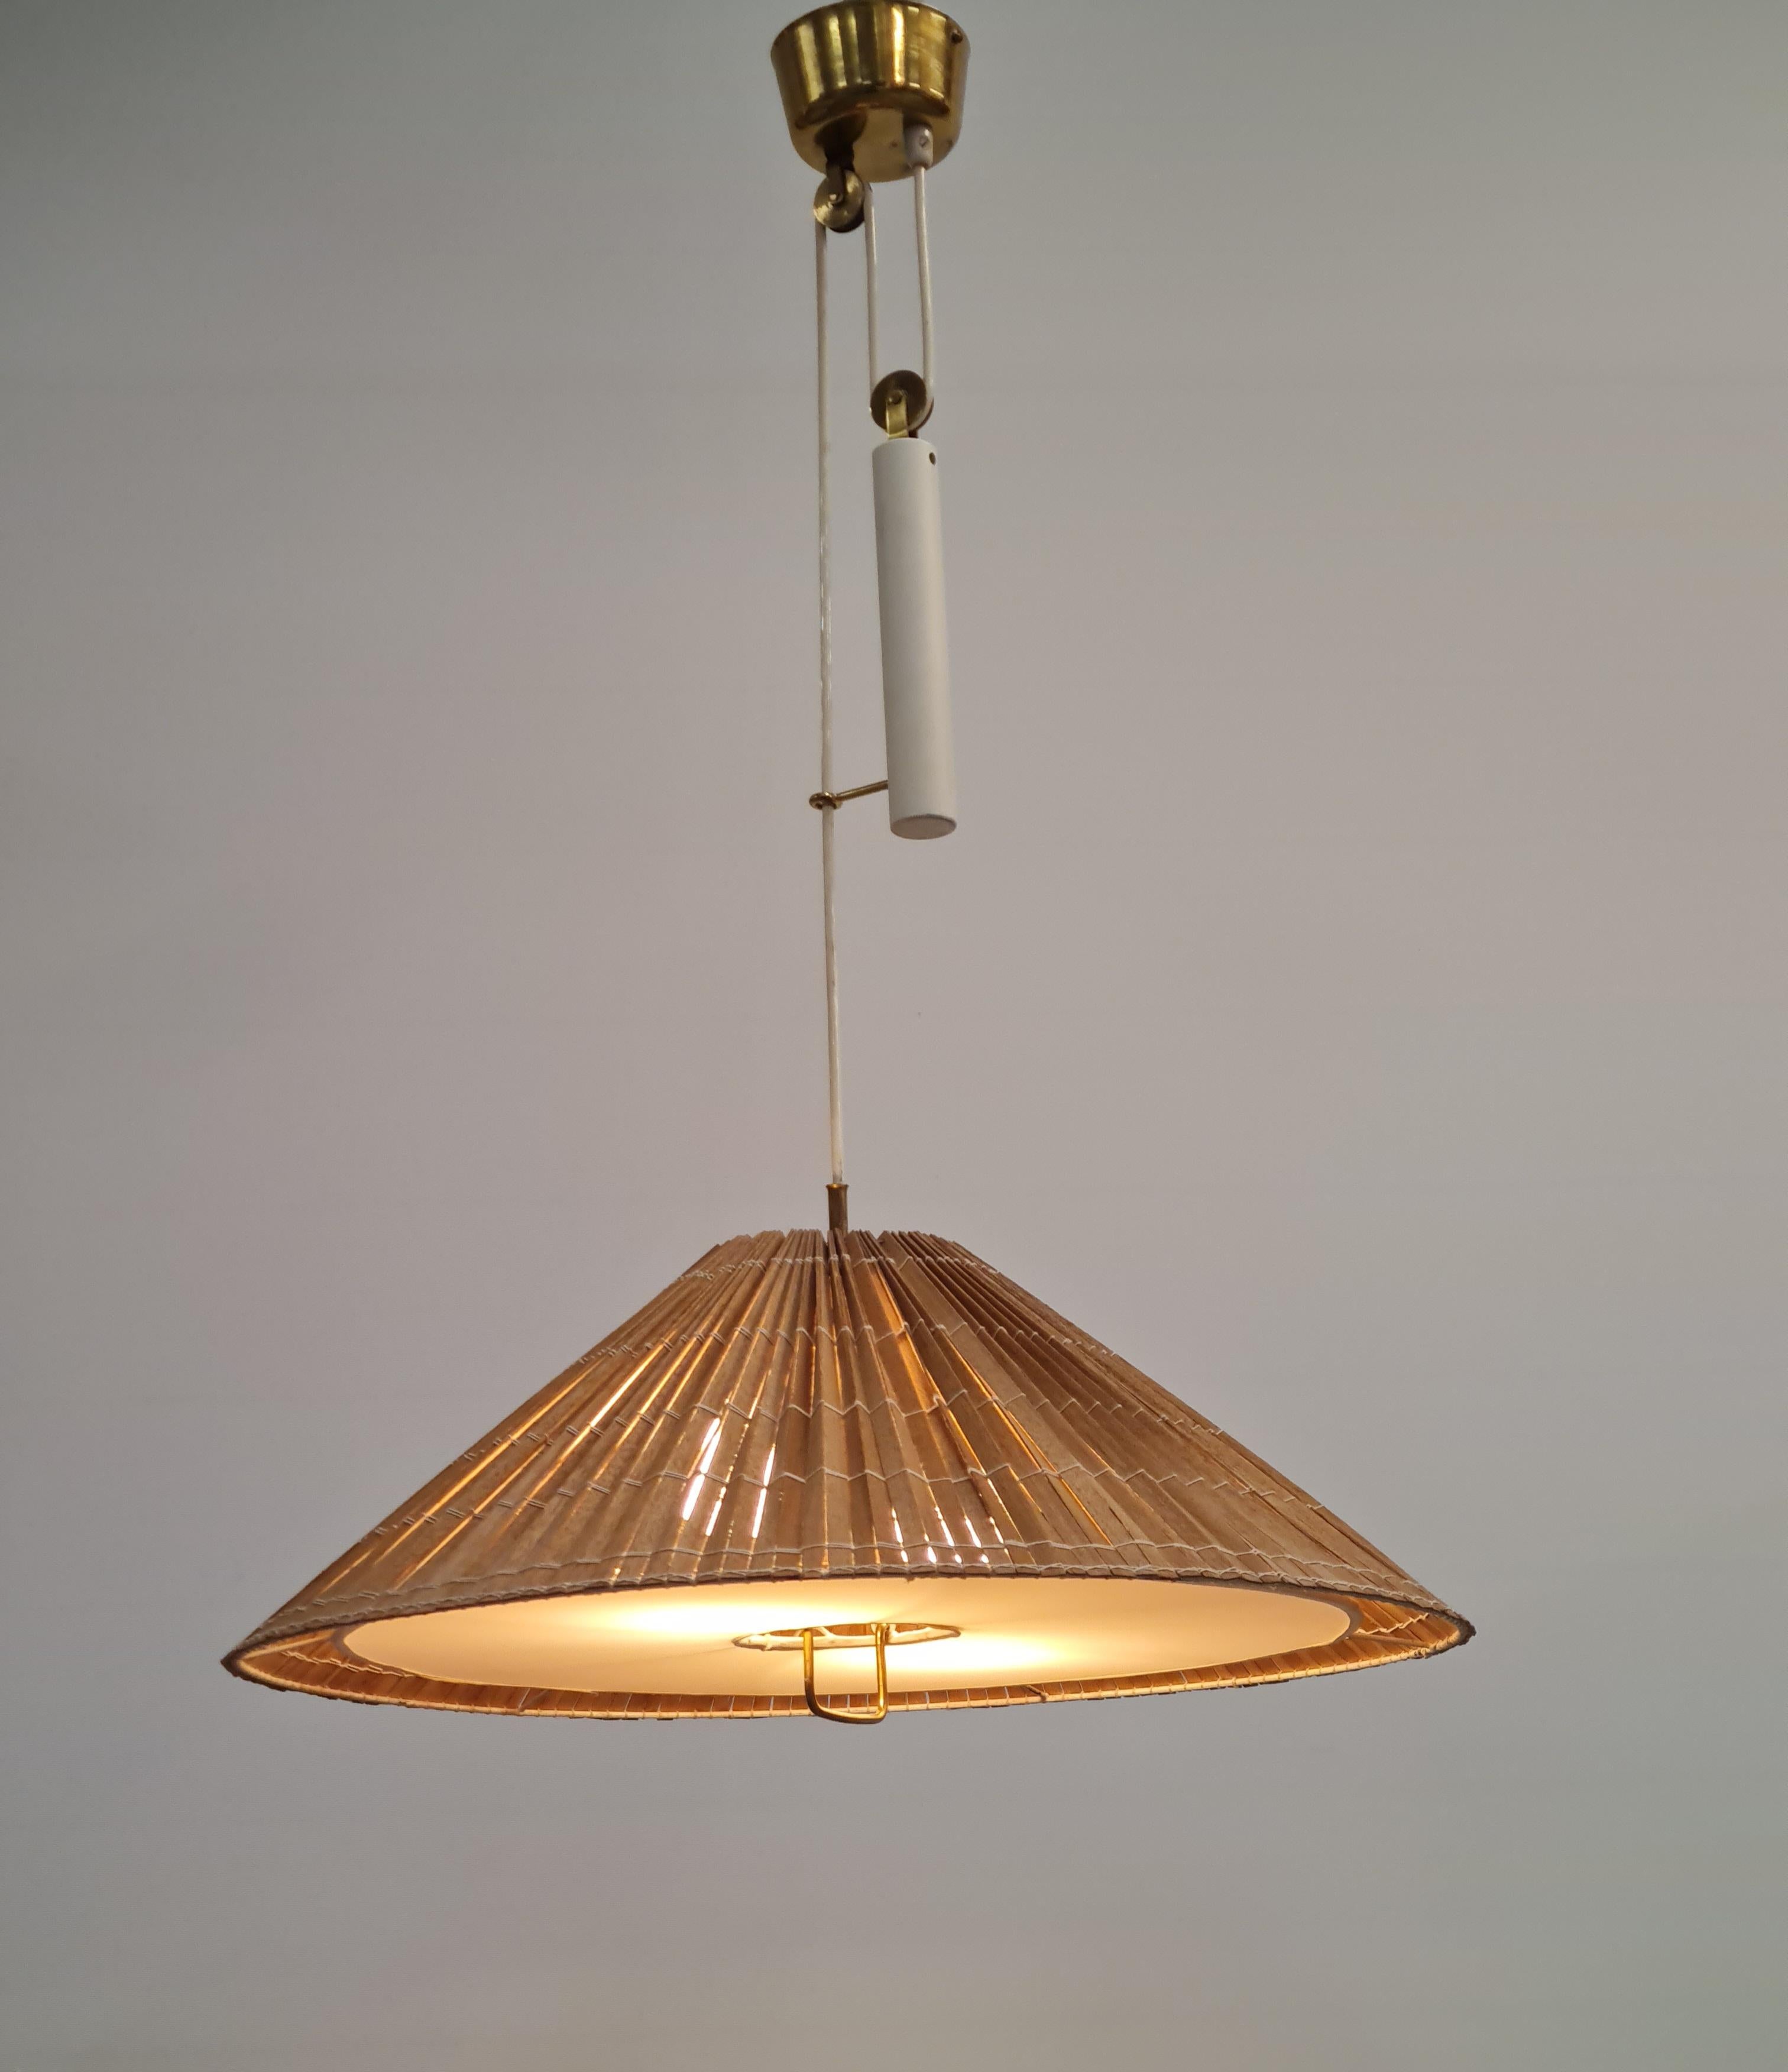 Scandinavian Modern Paavo Tynell Ceiling Lamp model no A1998, 1950s For Sale